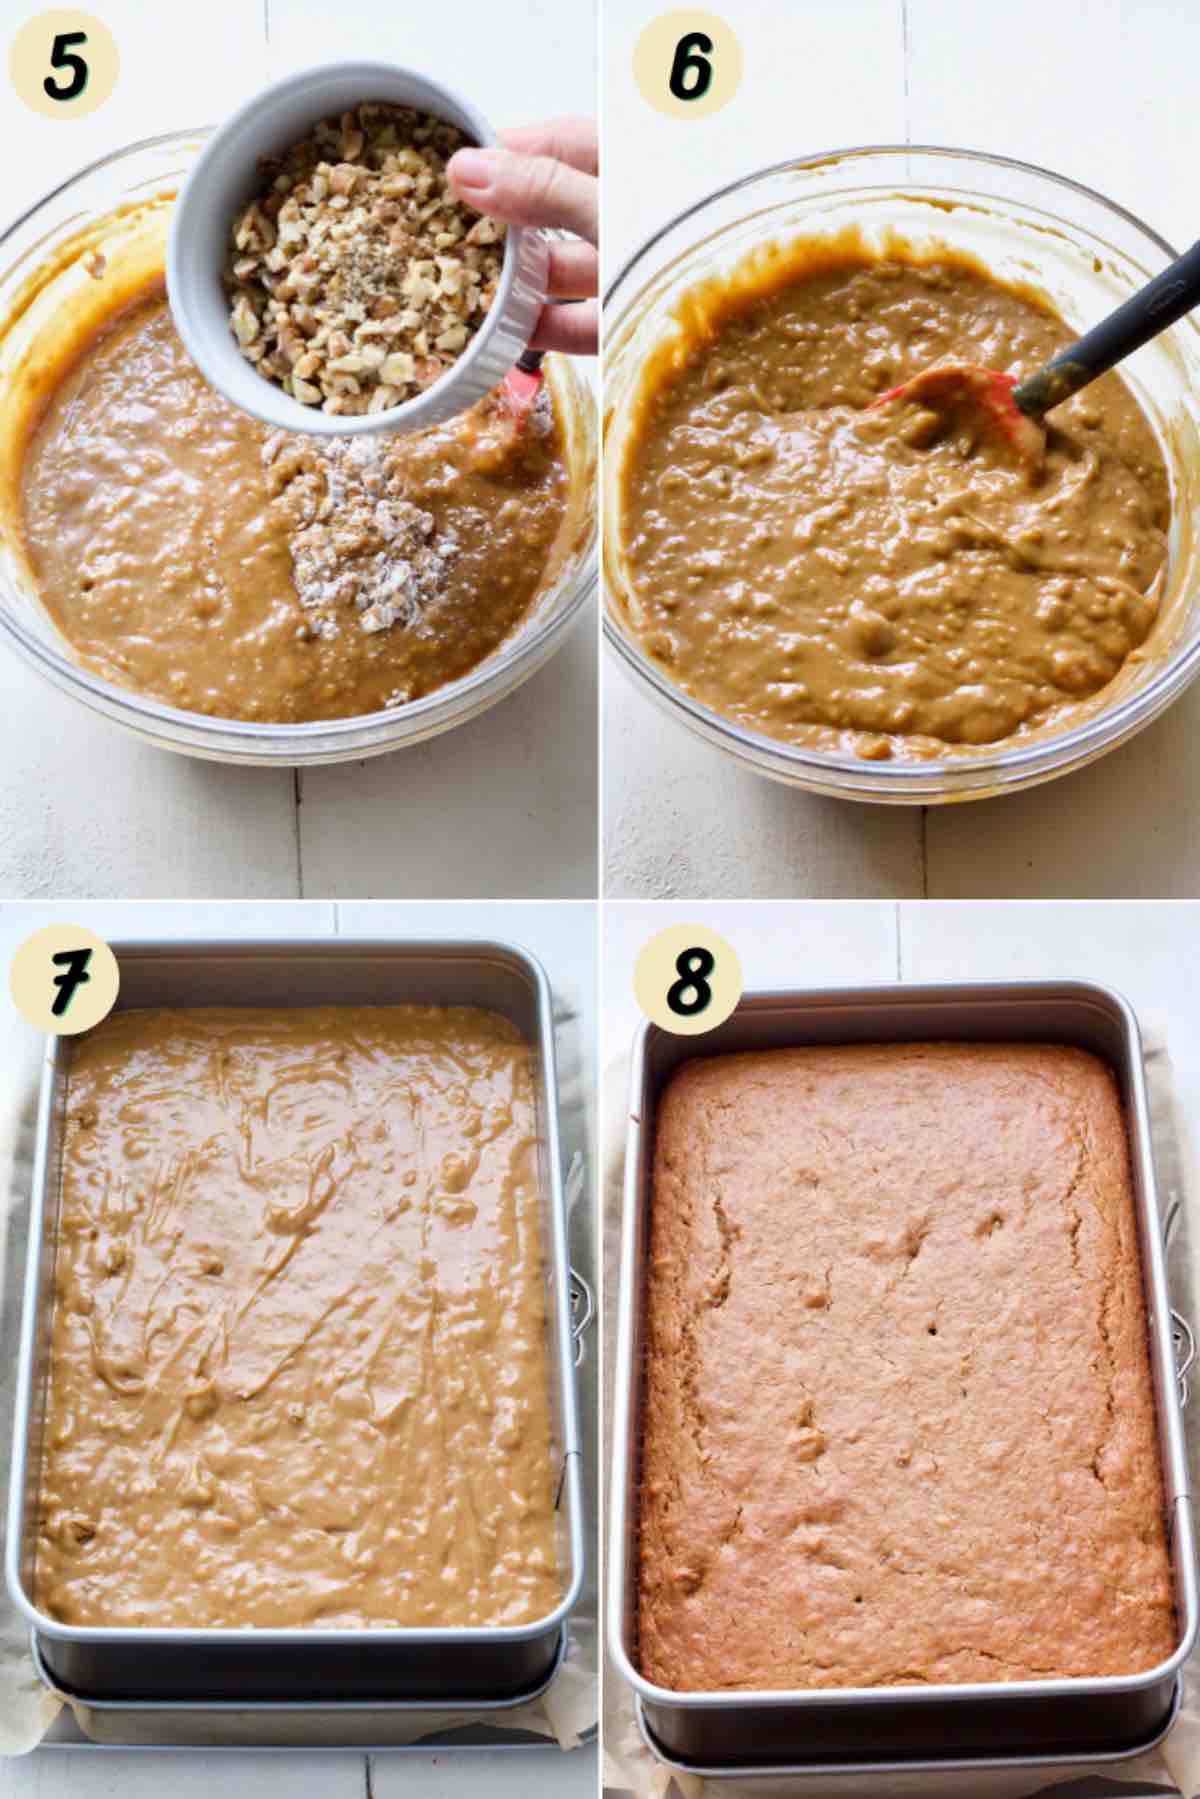 Adding walnuts to cake batter and cake before and after baking.